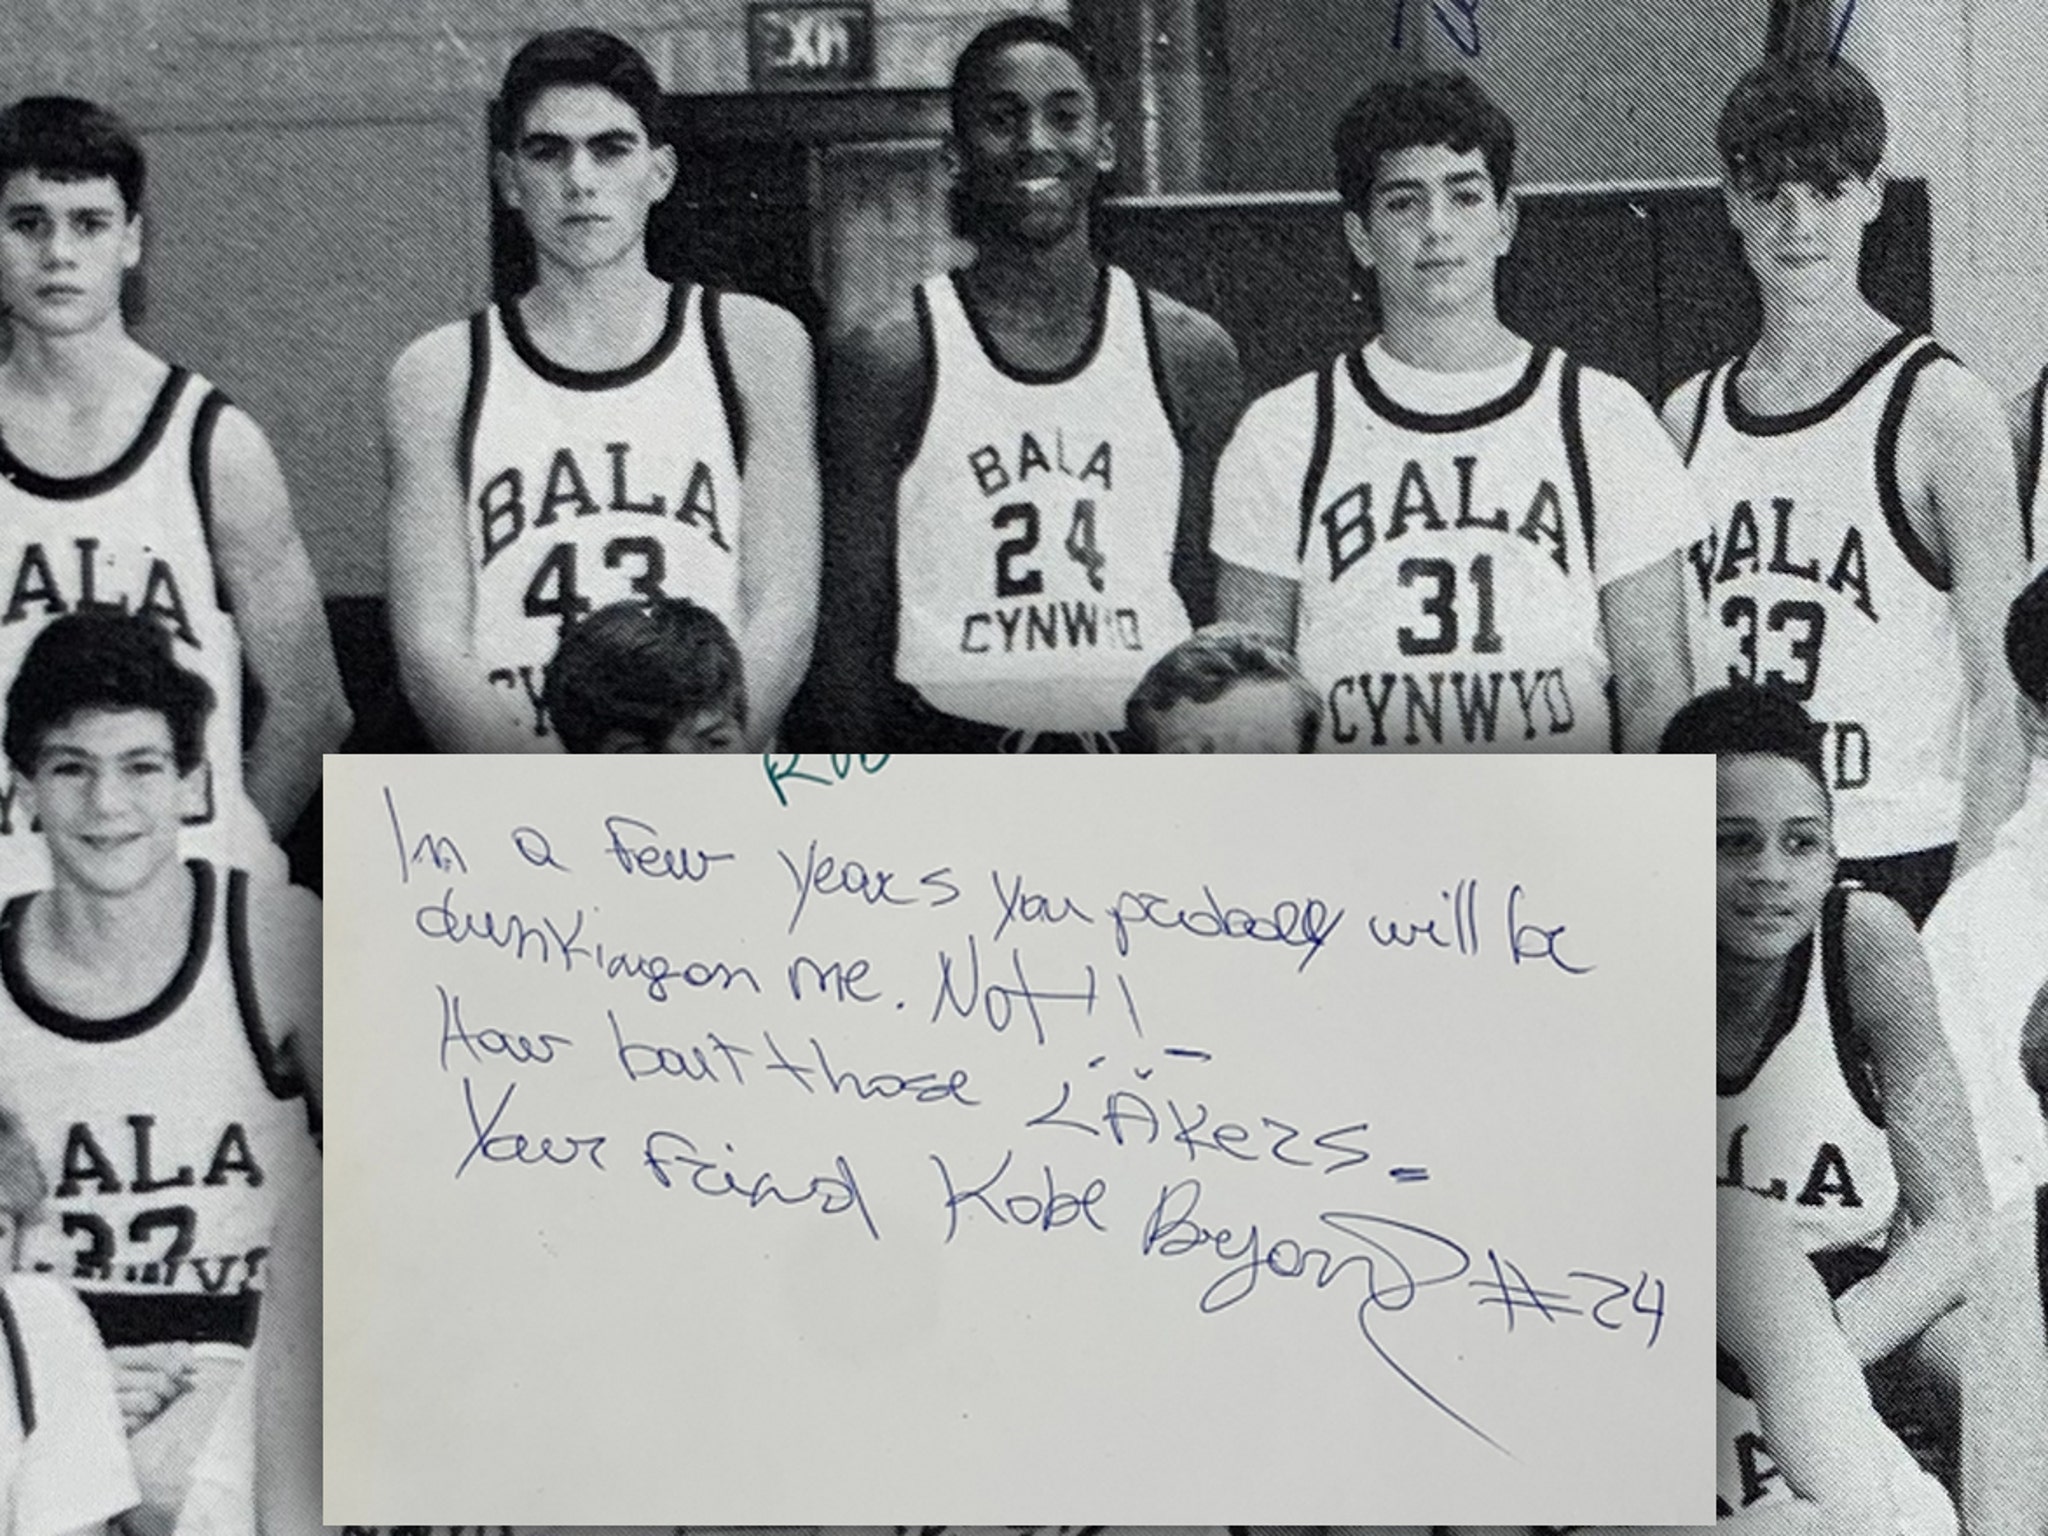 Kobe Bryant 8th Grade Yearbook Up For 